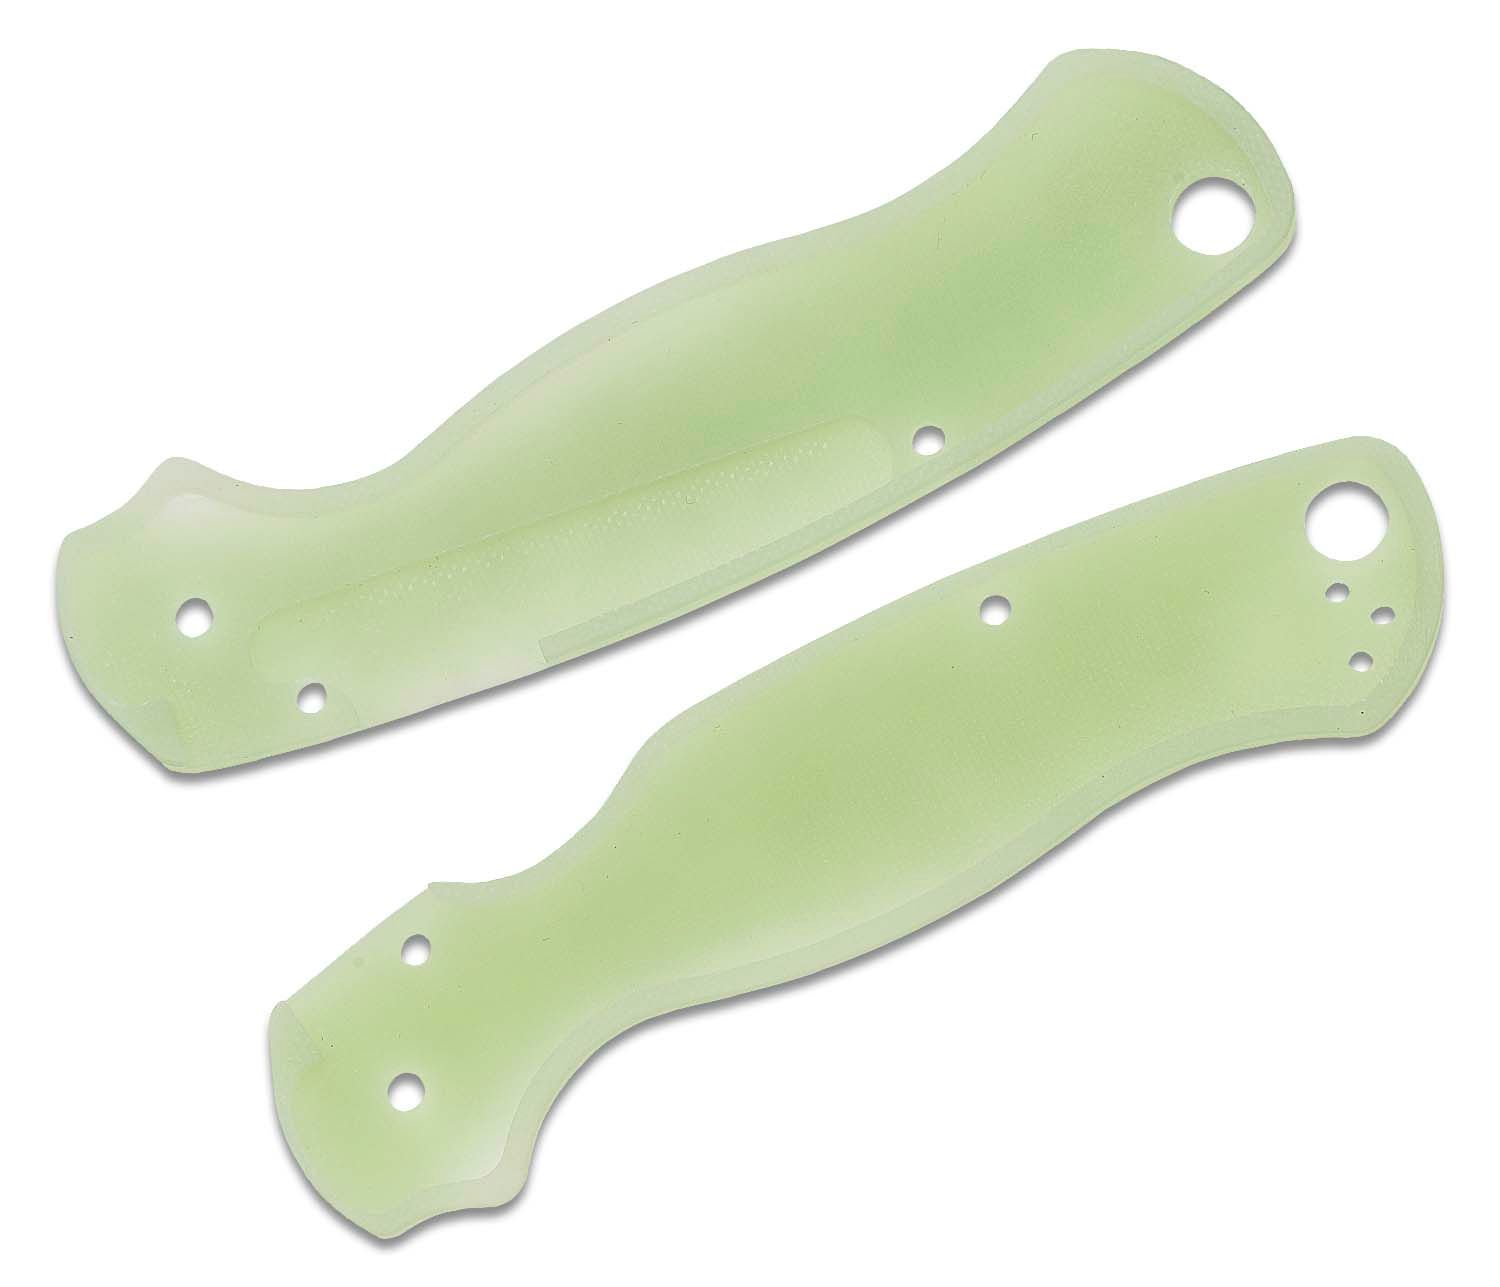 Flytanium Lotus Natural Jade G-10 Scales for Spyderco Paramilitary 2,  Knife Not Included - KnifeCenter - FLY-0816